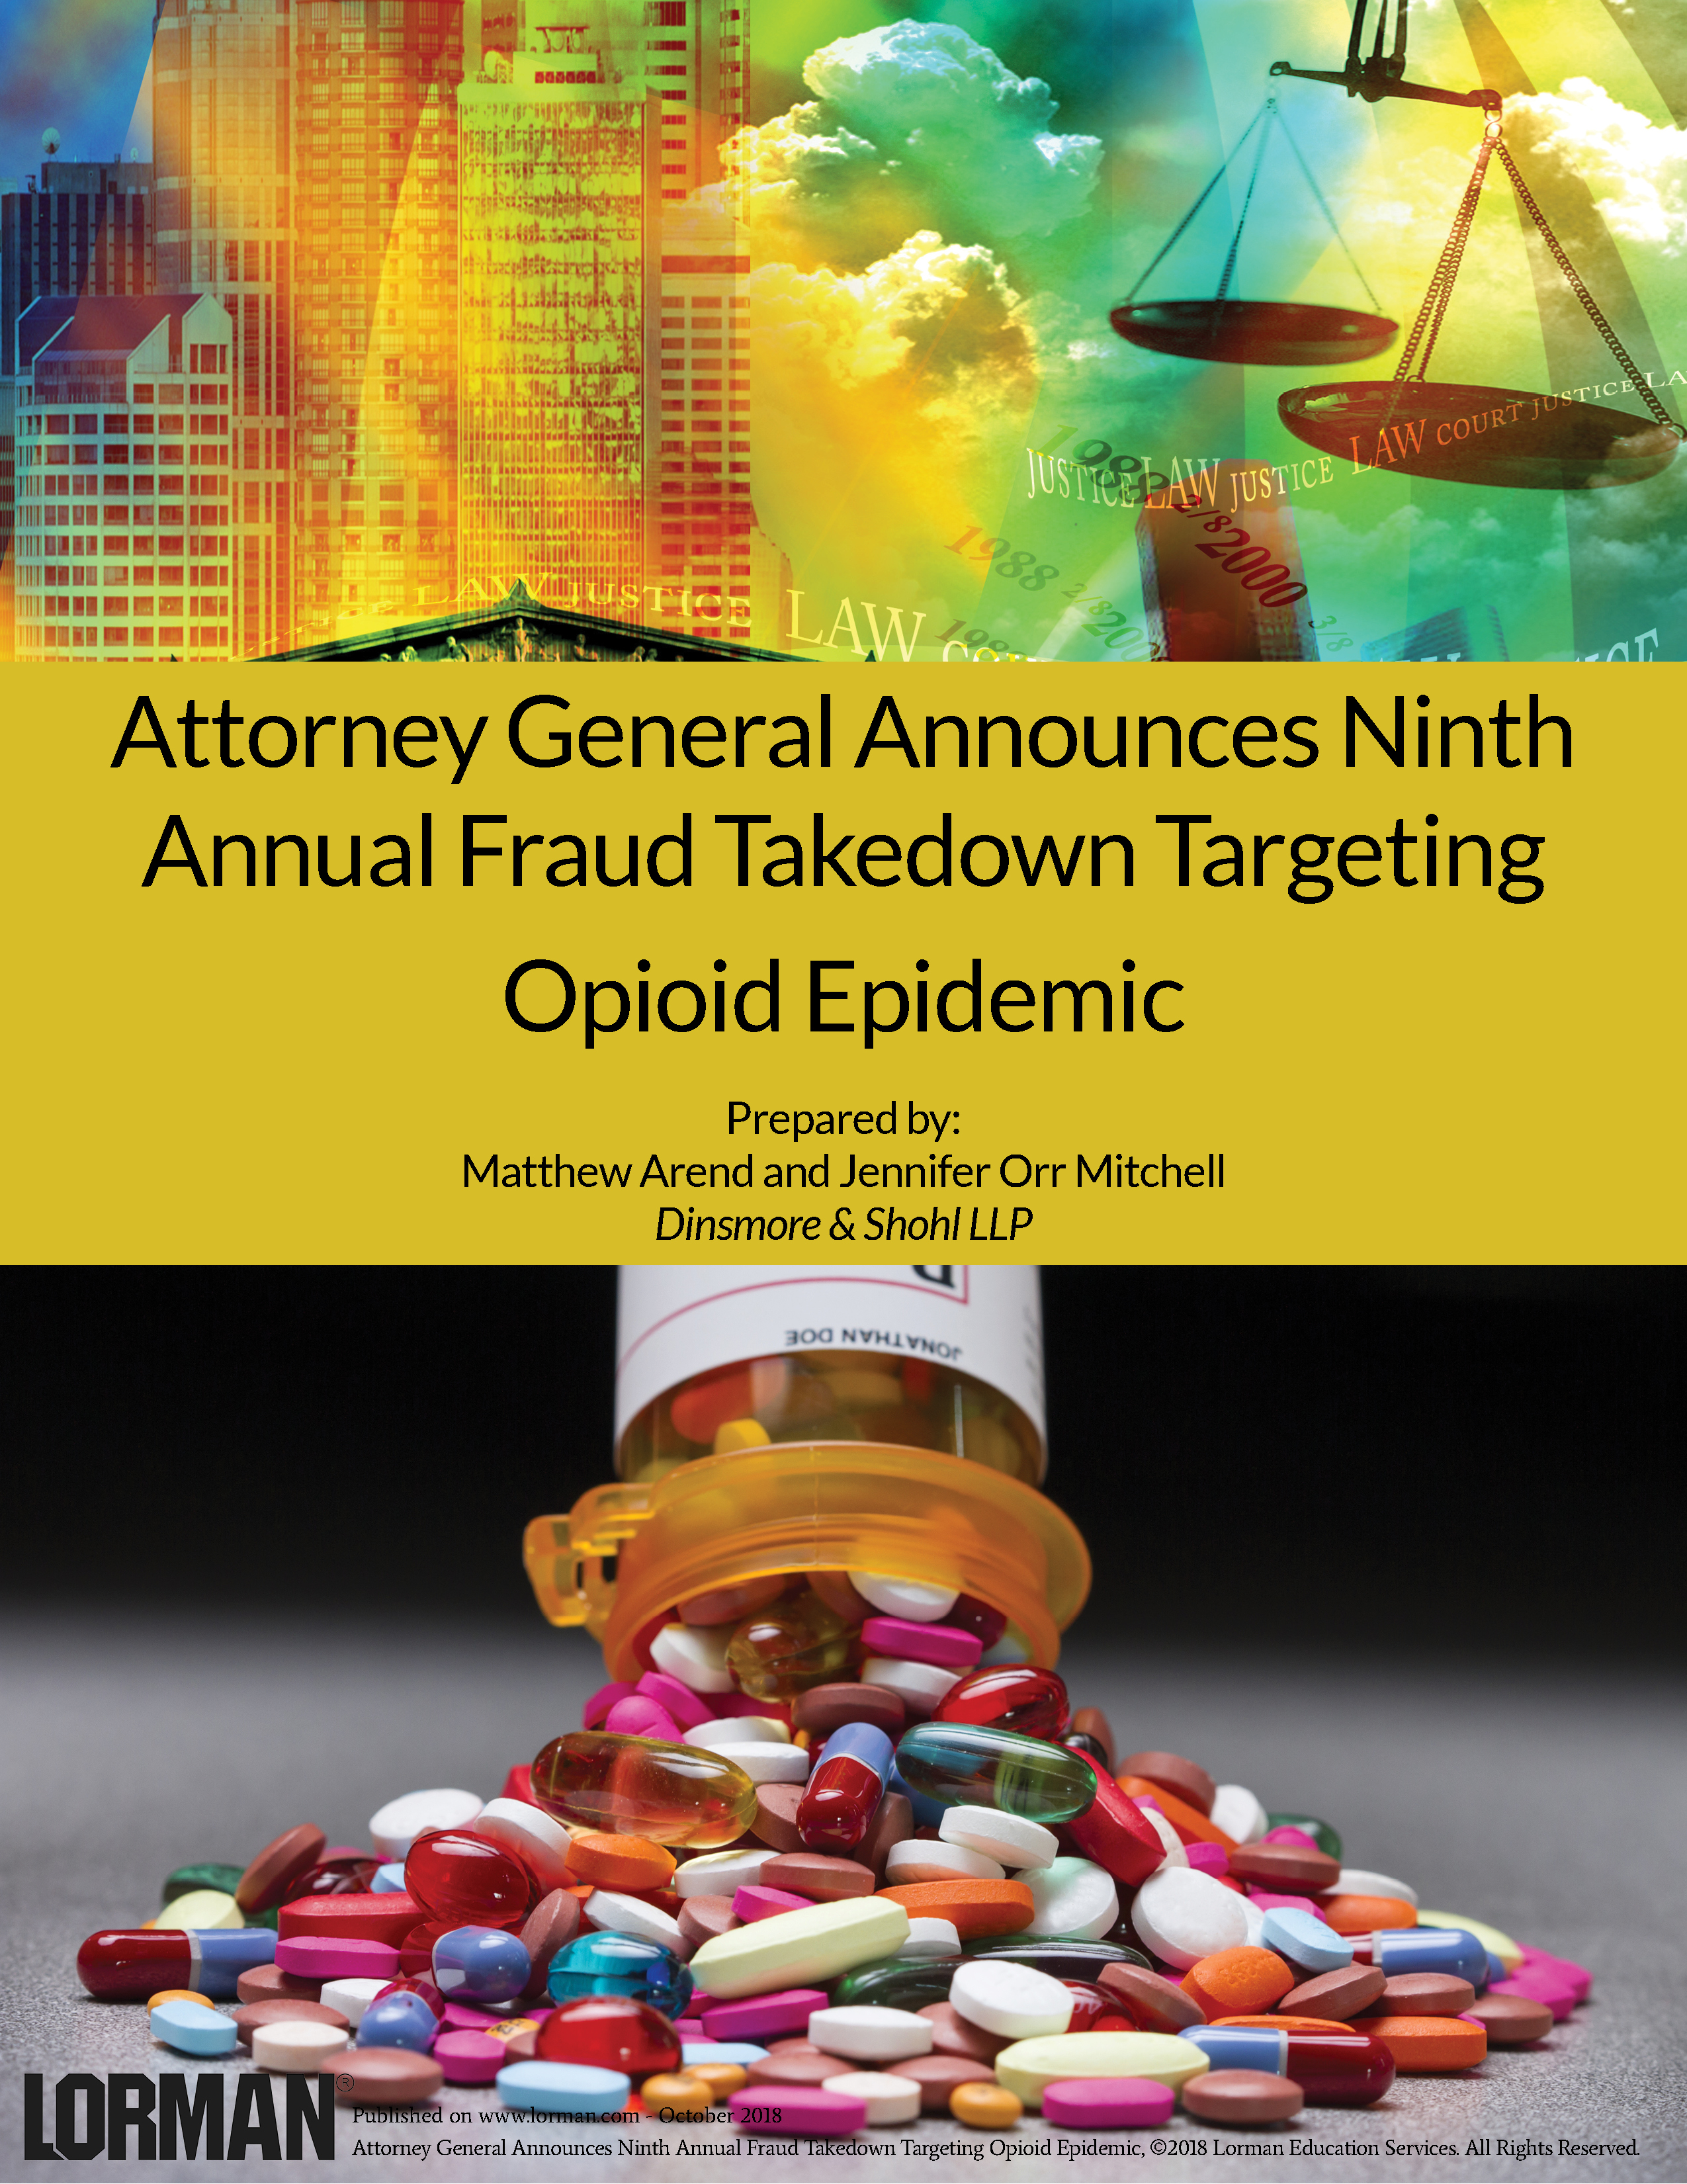 Attorney General Announces Ninth Annual Fraud Takedown Targeting Opioid Epidemic